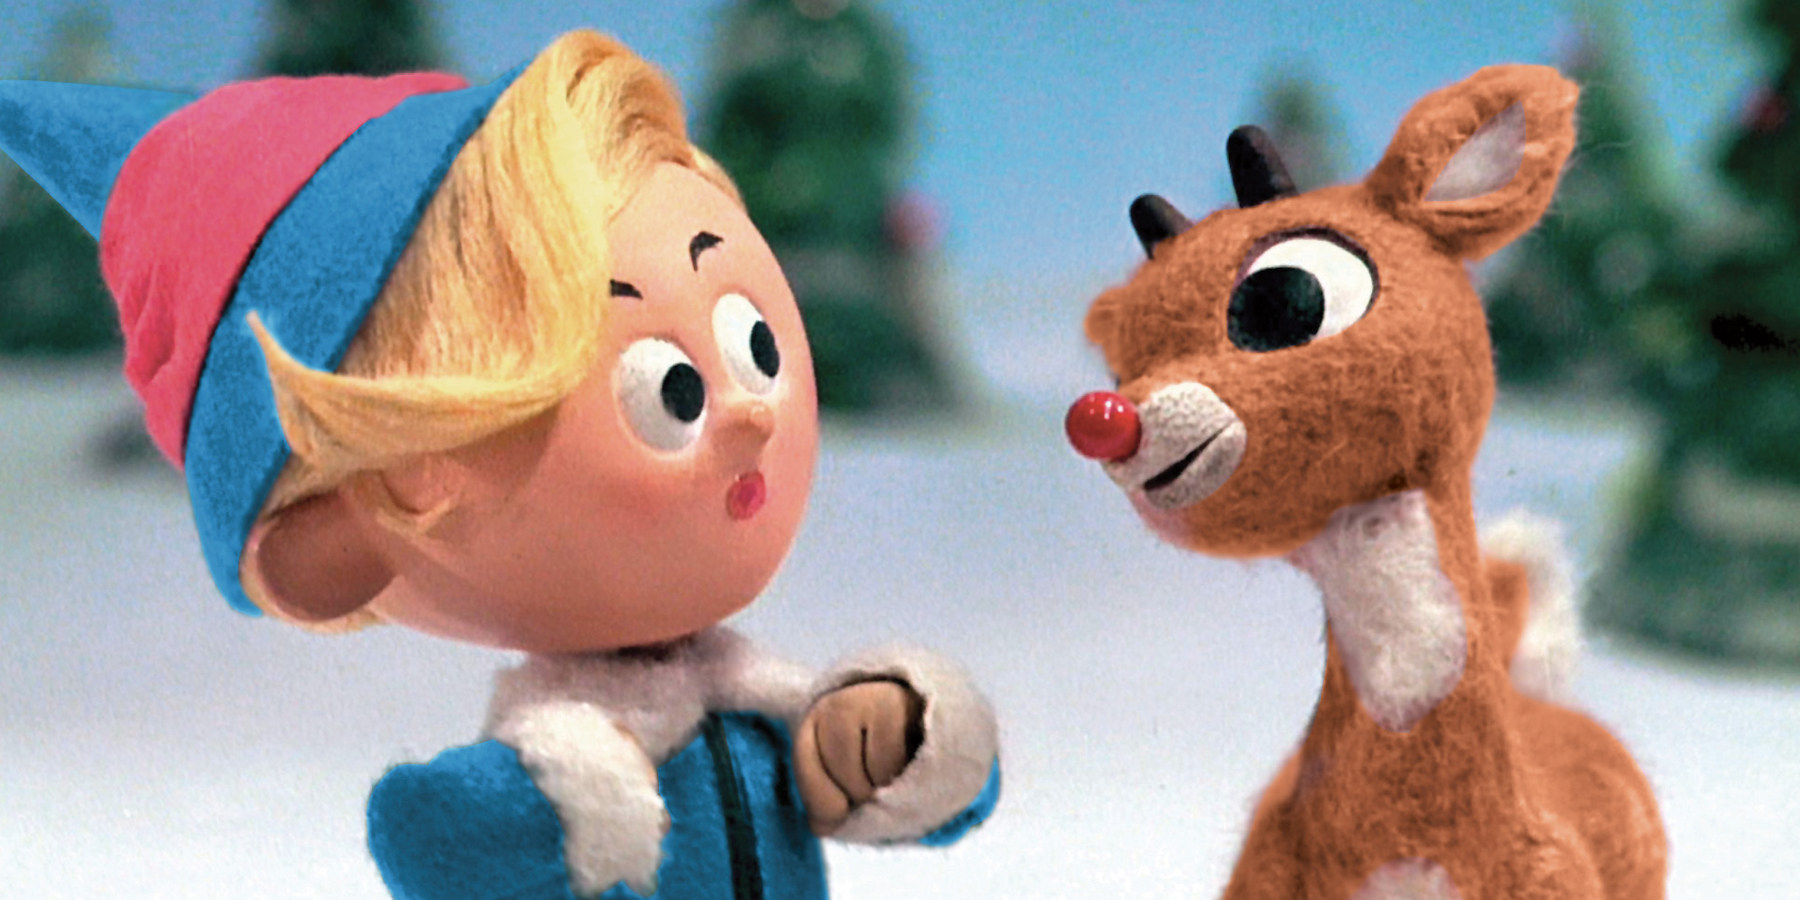 Hermey talks to Rudolph in Rudolph the Red-Nosed Reindeer 